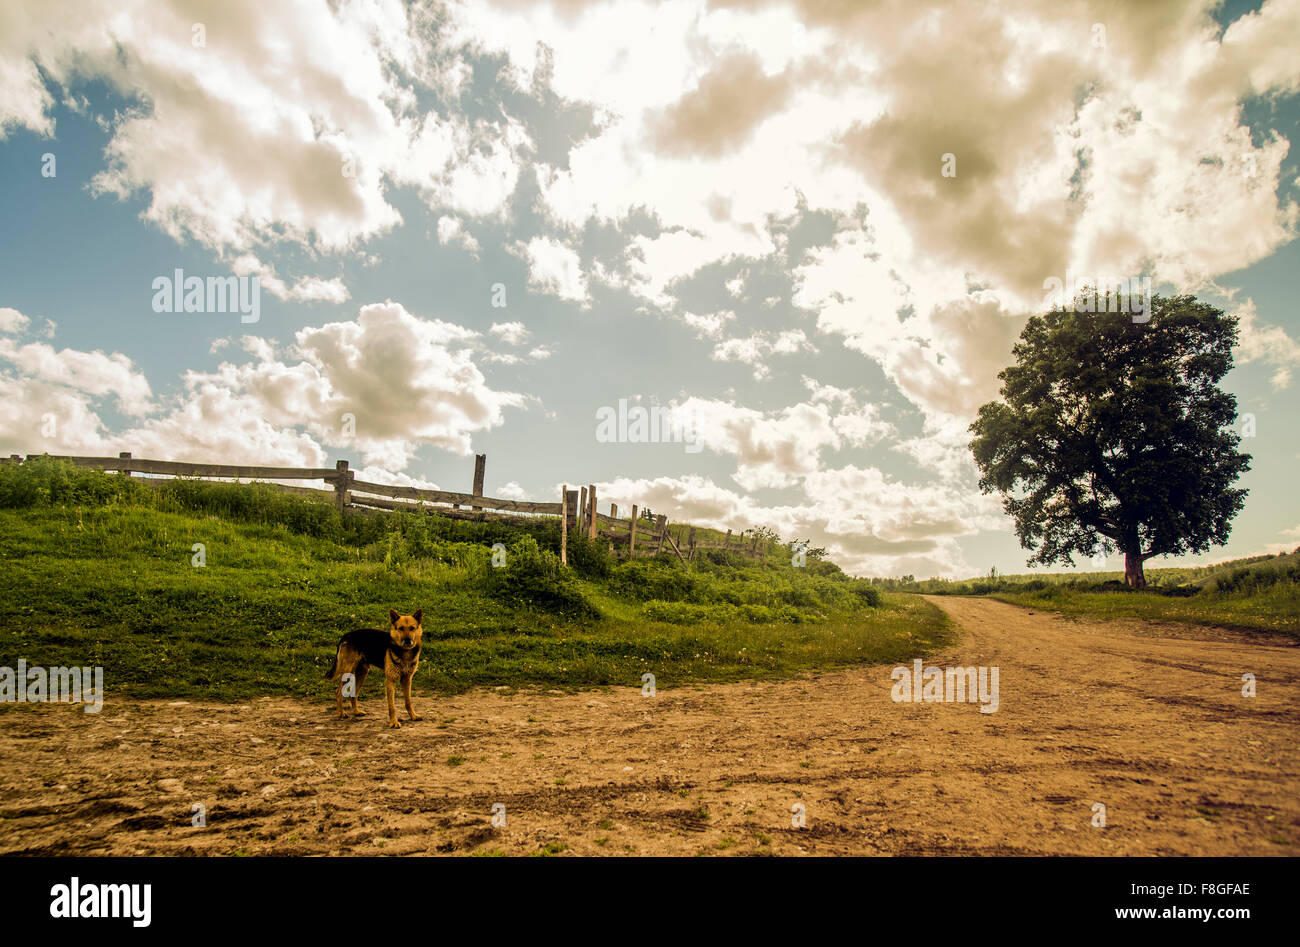 Dog on rural dirt path Stock Photo